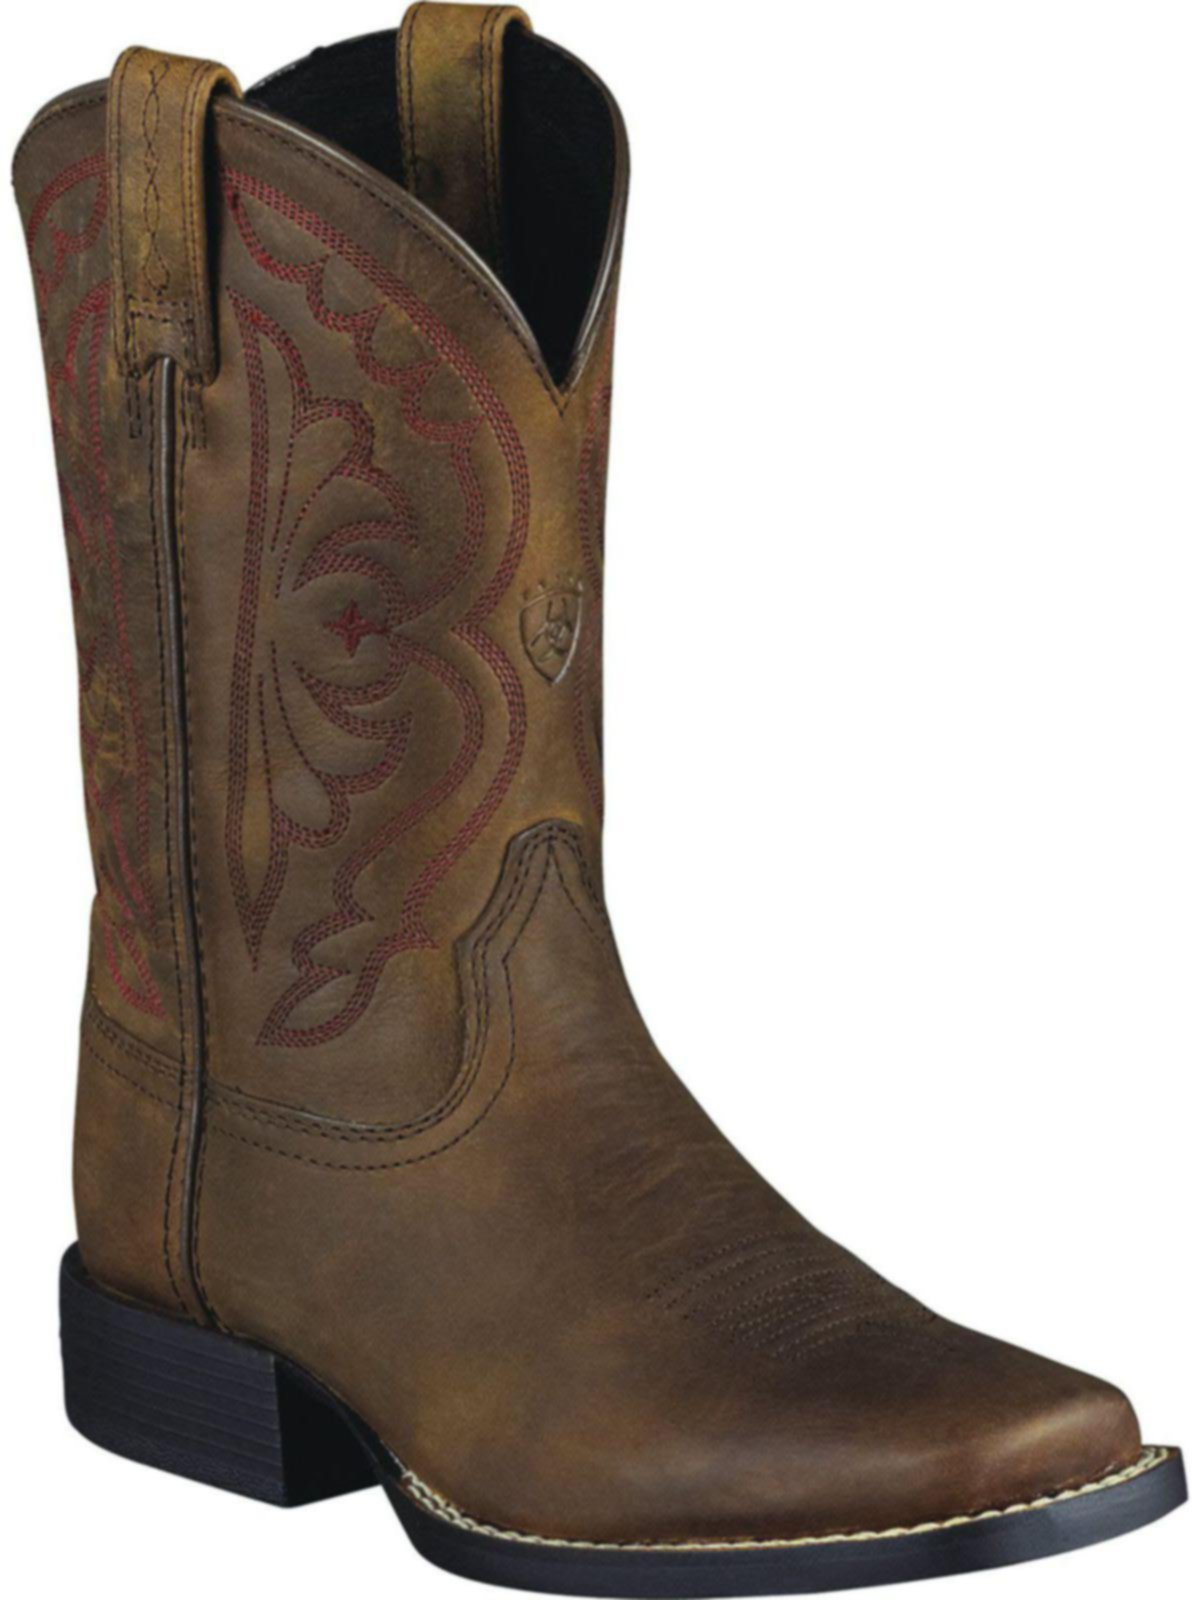 Shop Ariat Kids Quickdraw Western Boot 10004853 | Save 20% + Free ...